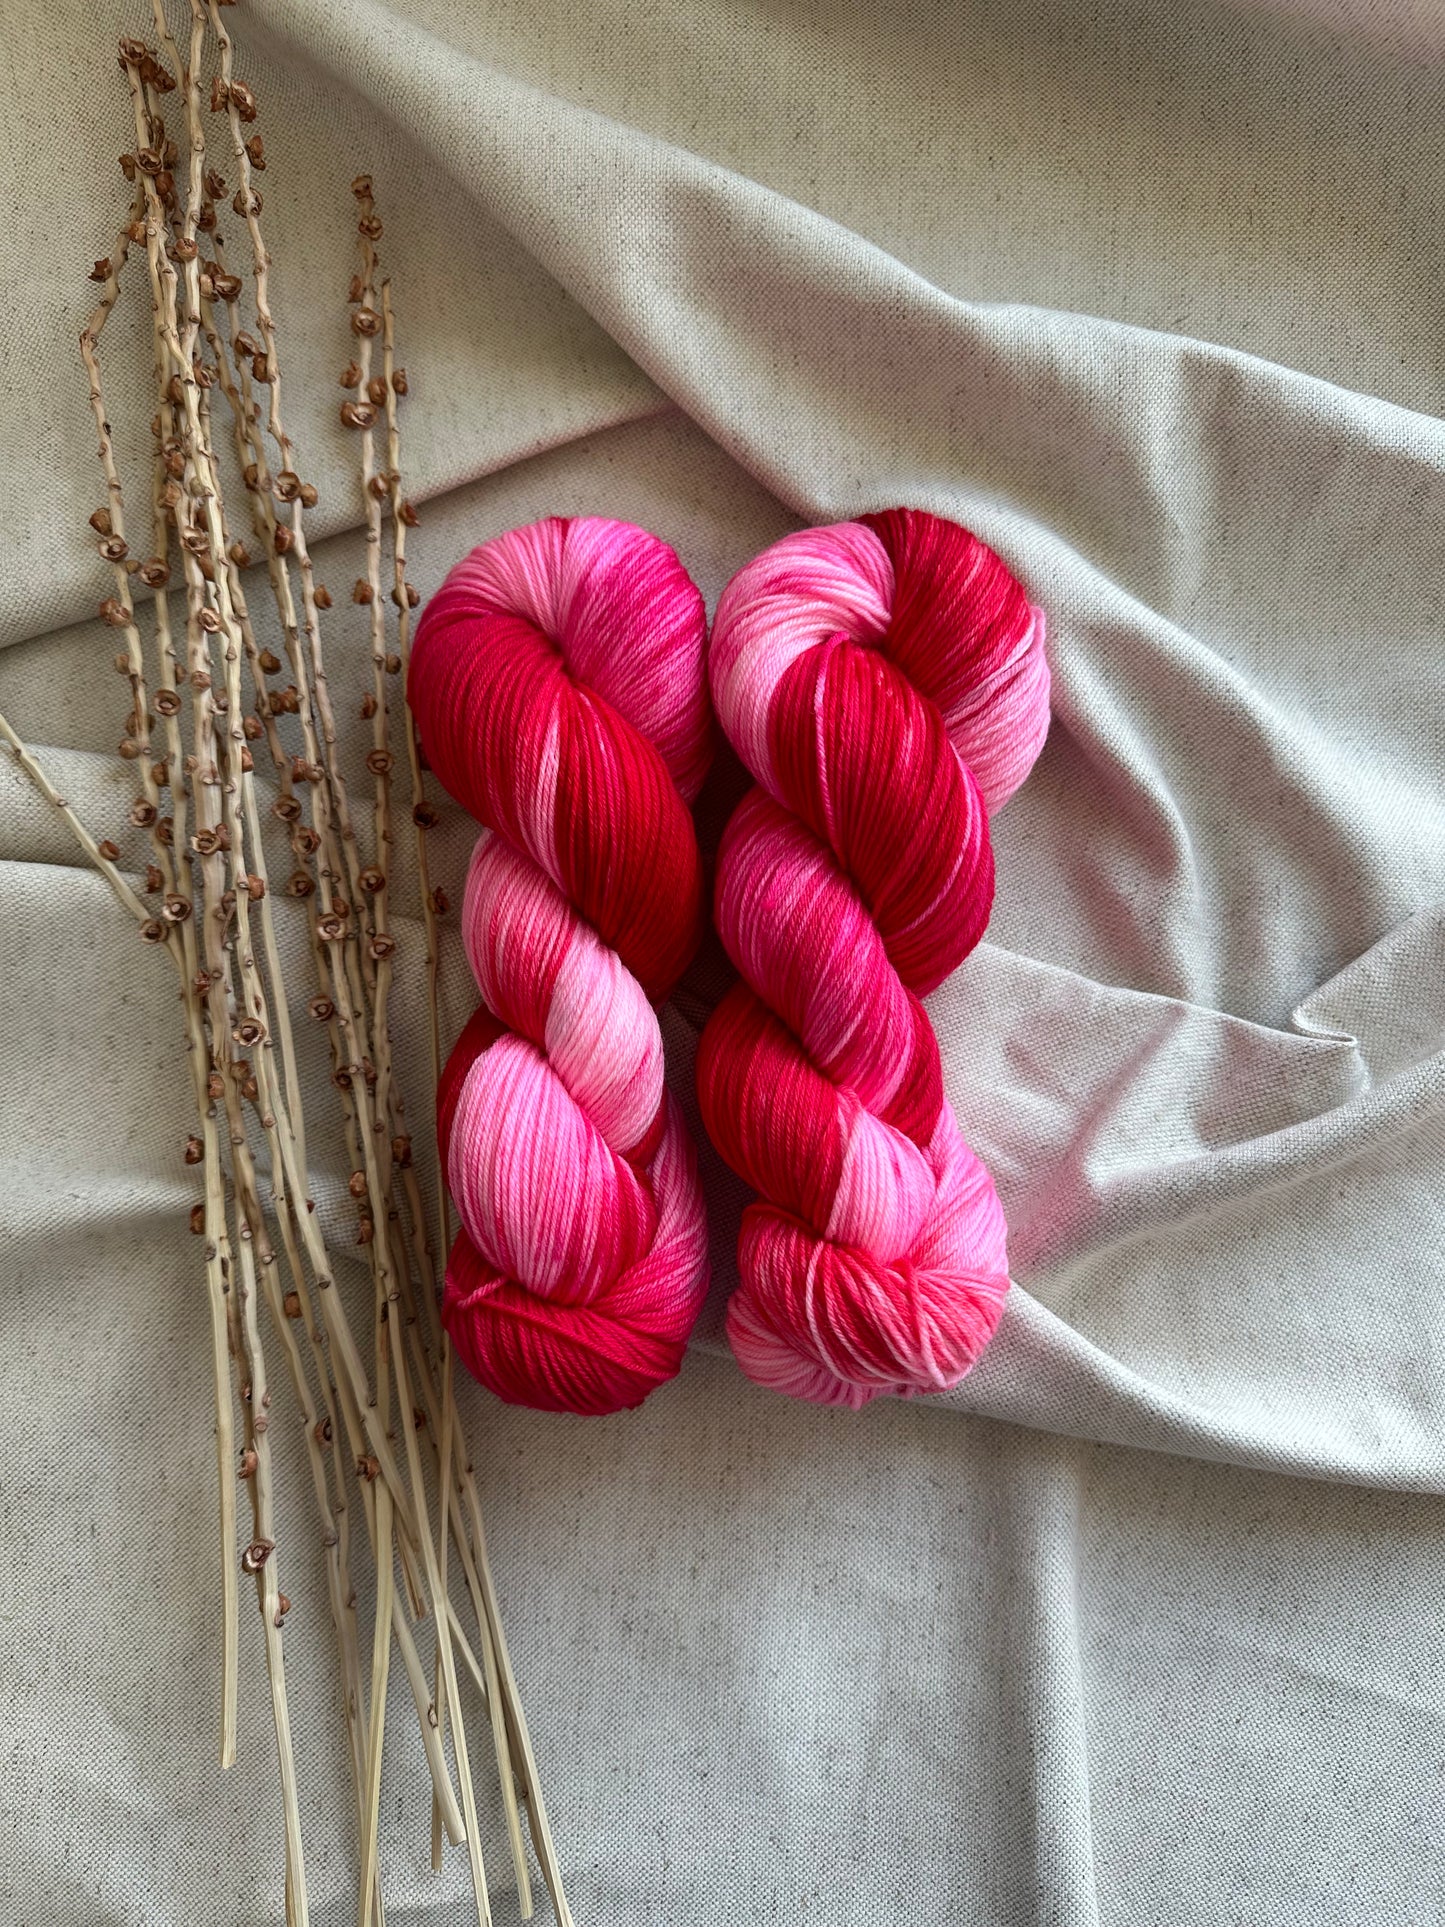 Let Me Call You Sweetheart 100g Skein